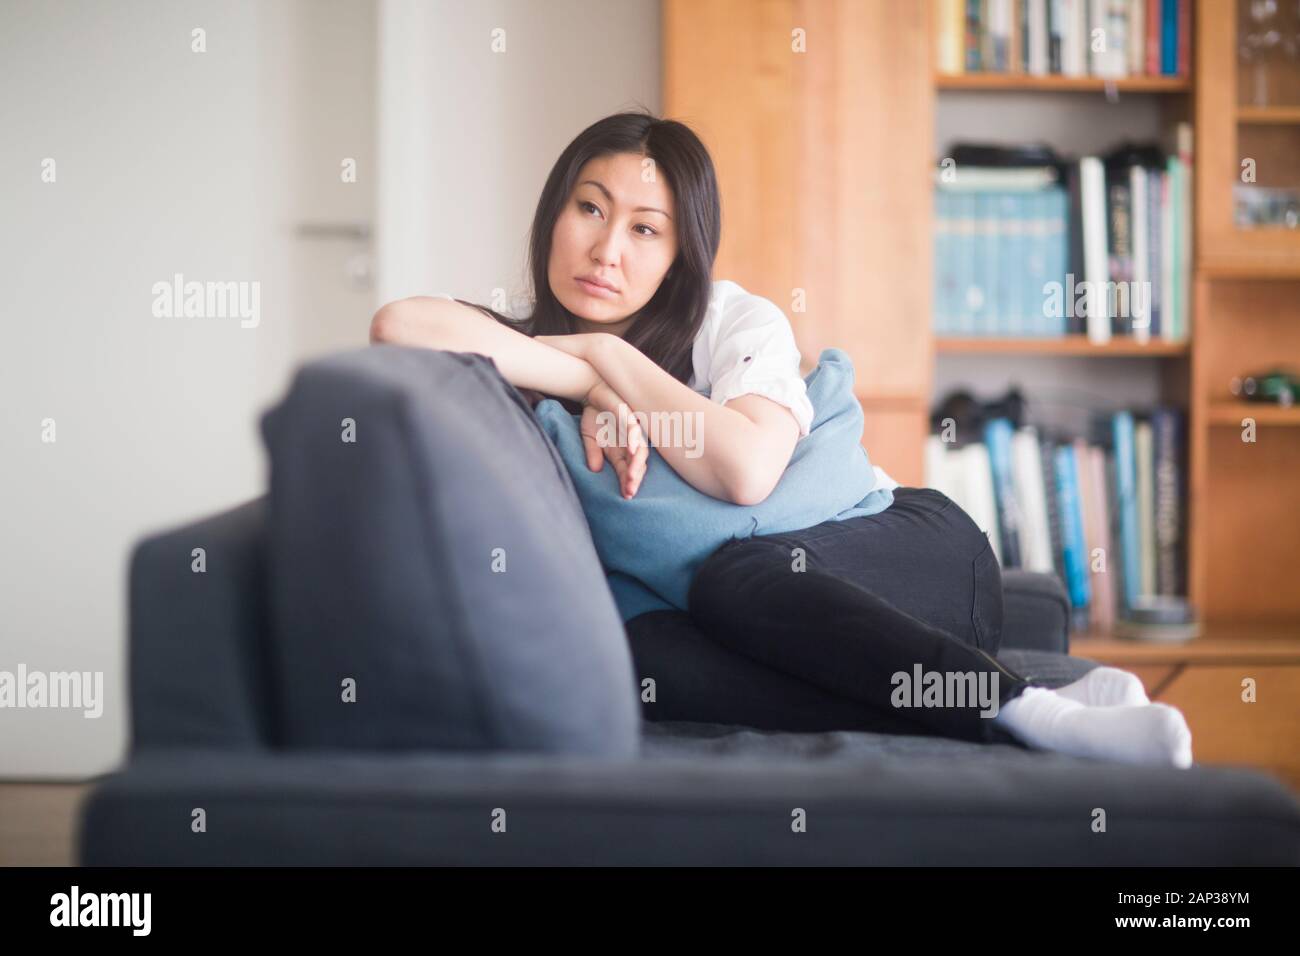 young woman at home in a living room lying on a couch revised Stock Photo